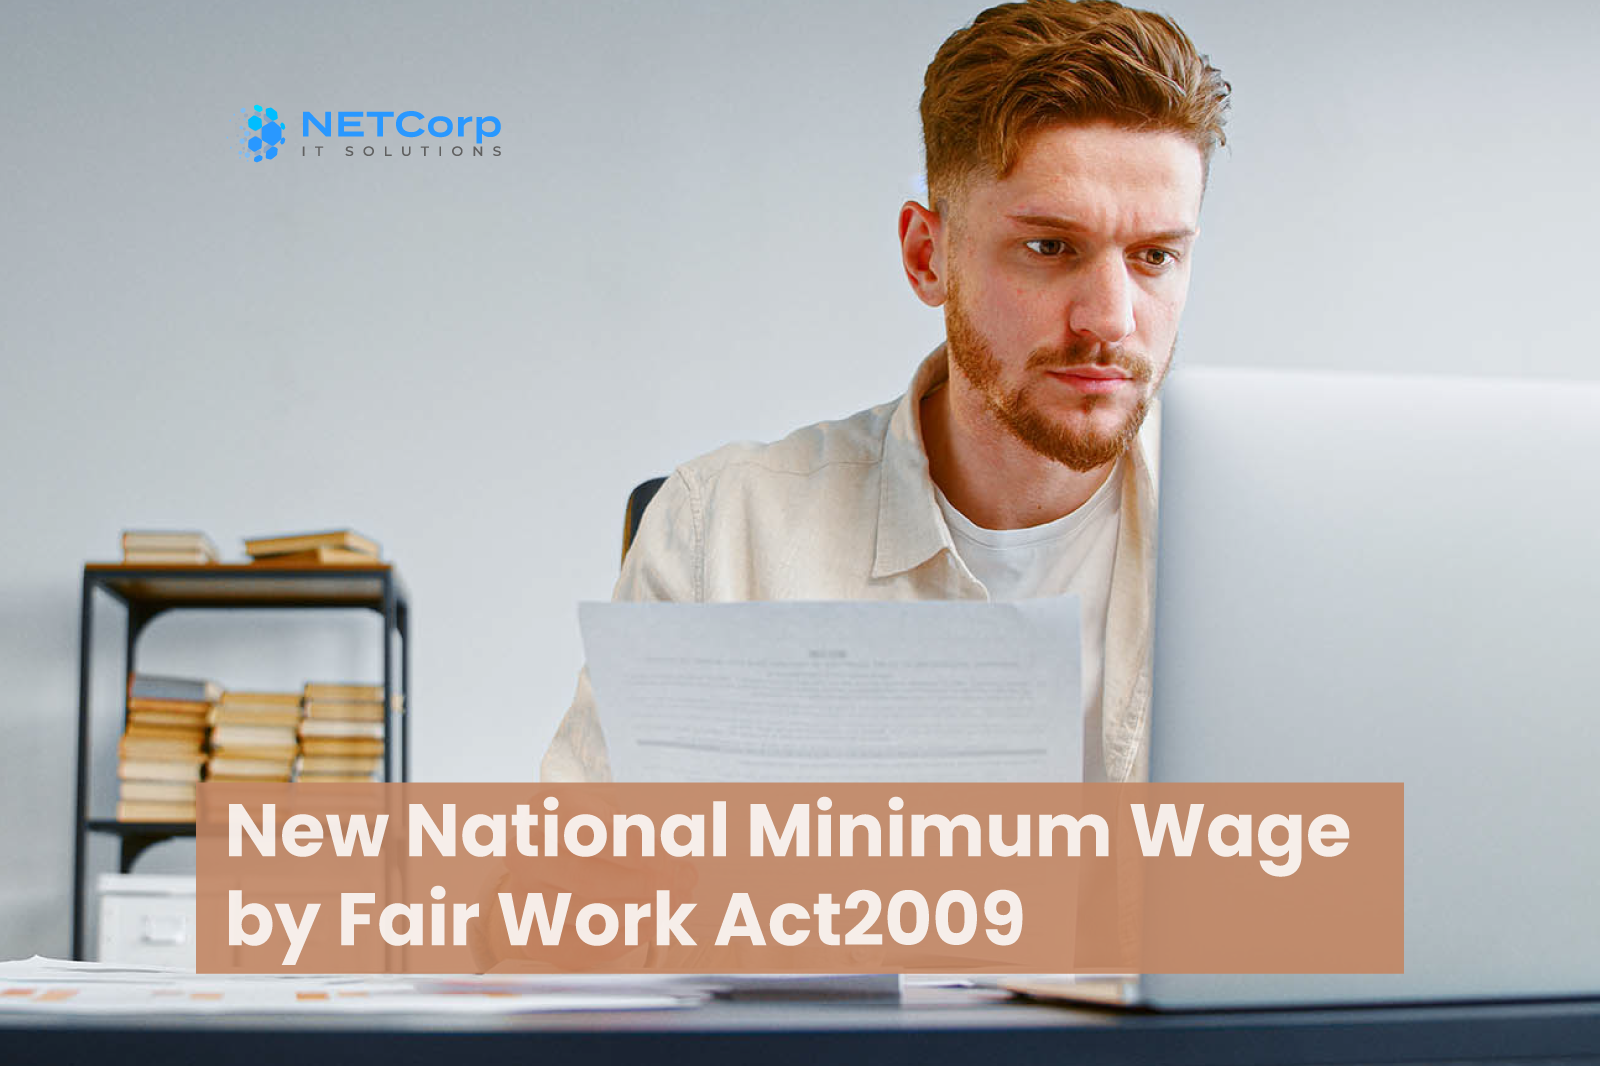 Increase in National Minimum Wages and Superannuation NETCorp IT Solution